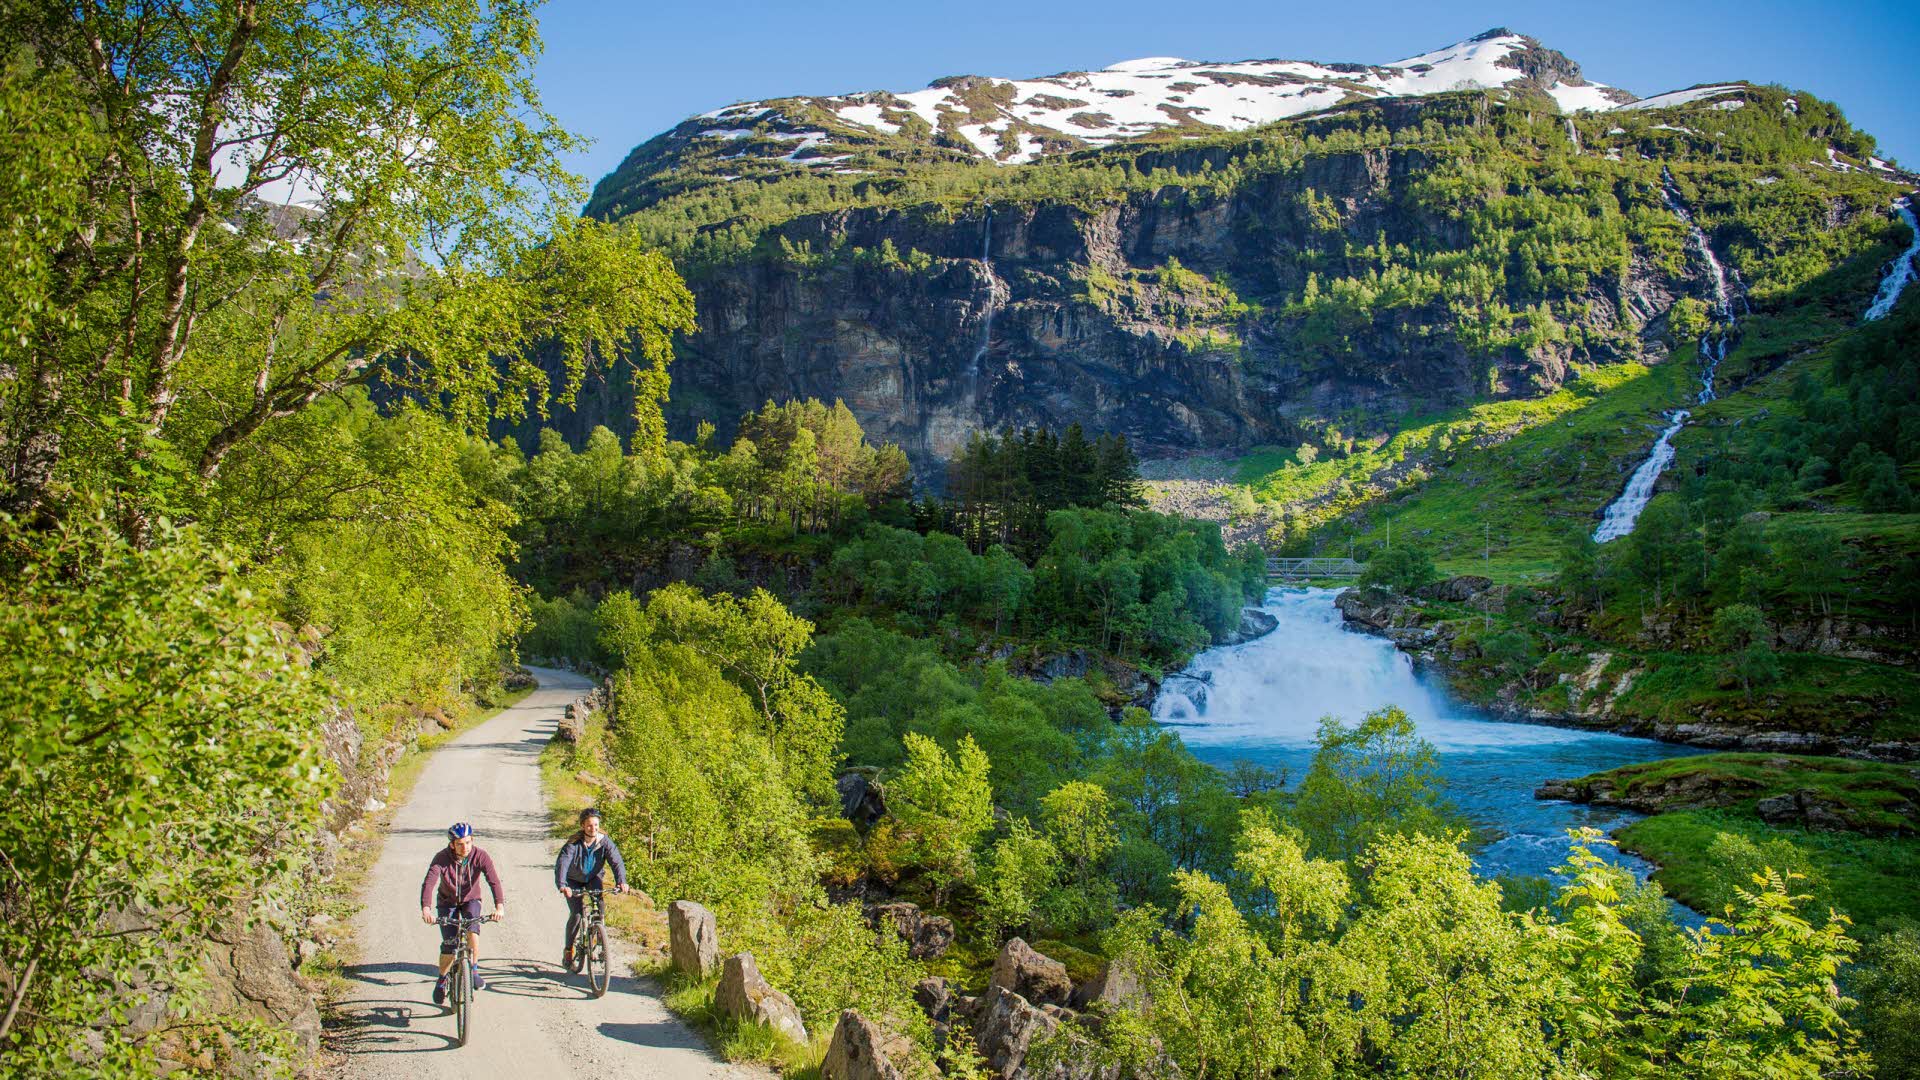 Two cyclists by the river in Flåmsdalen